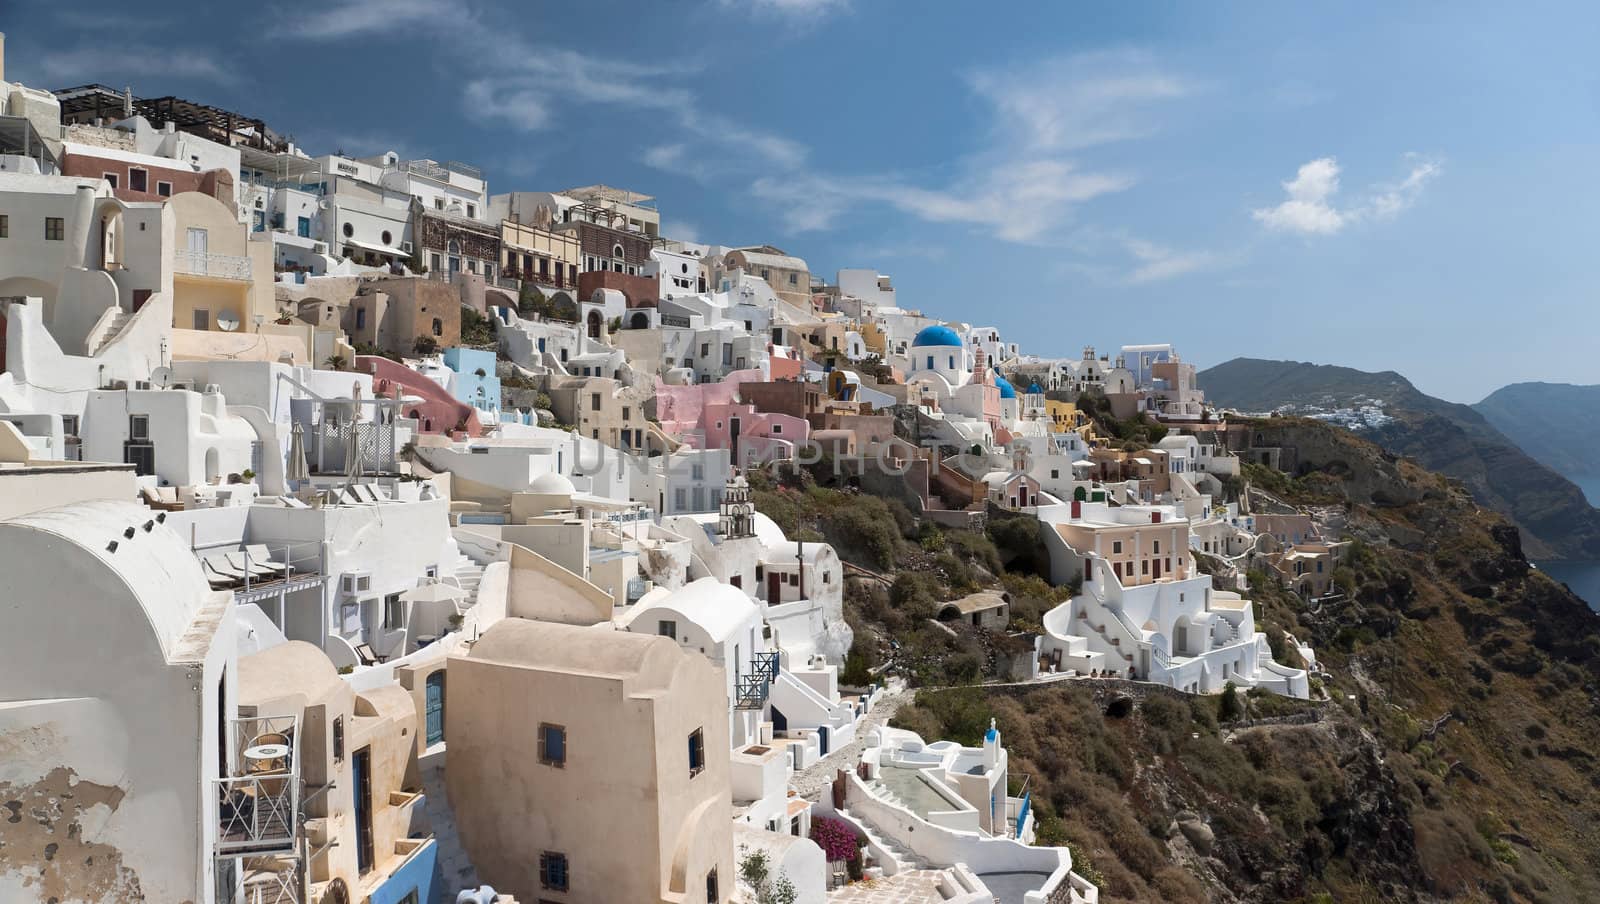 Ia buildings of typical architecture in Santorini island